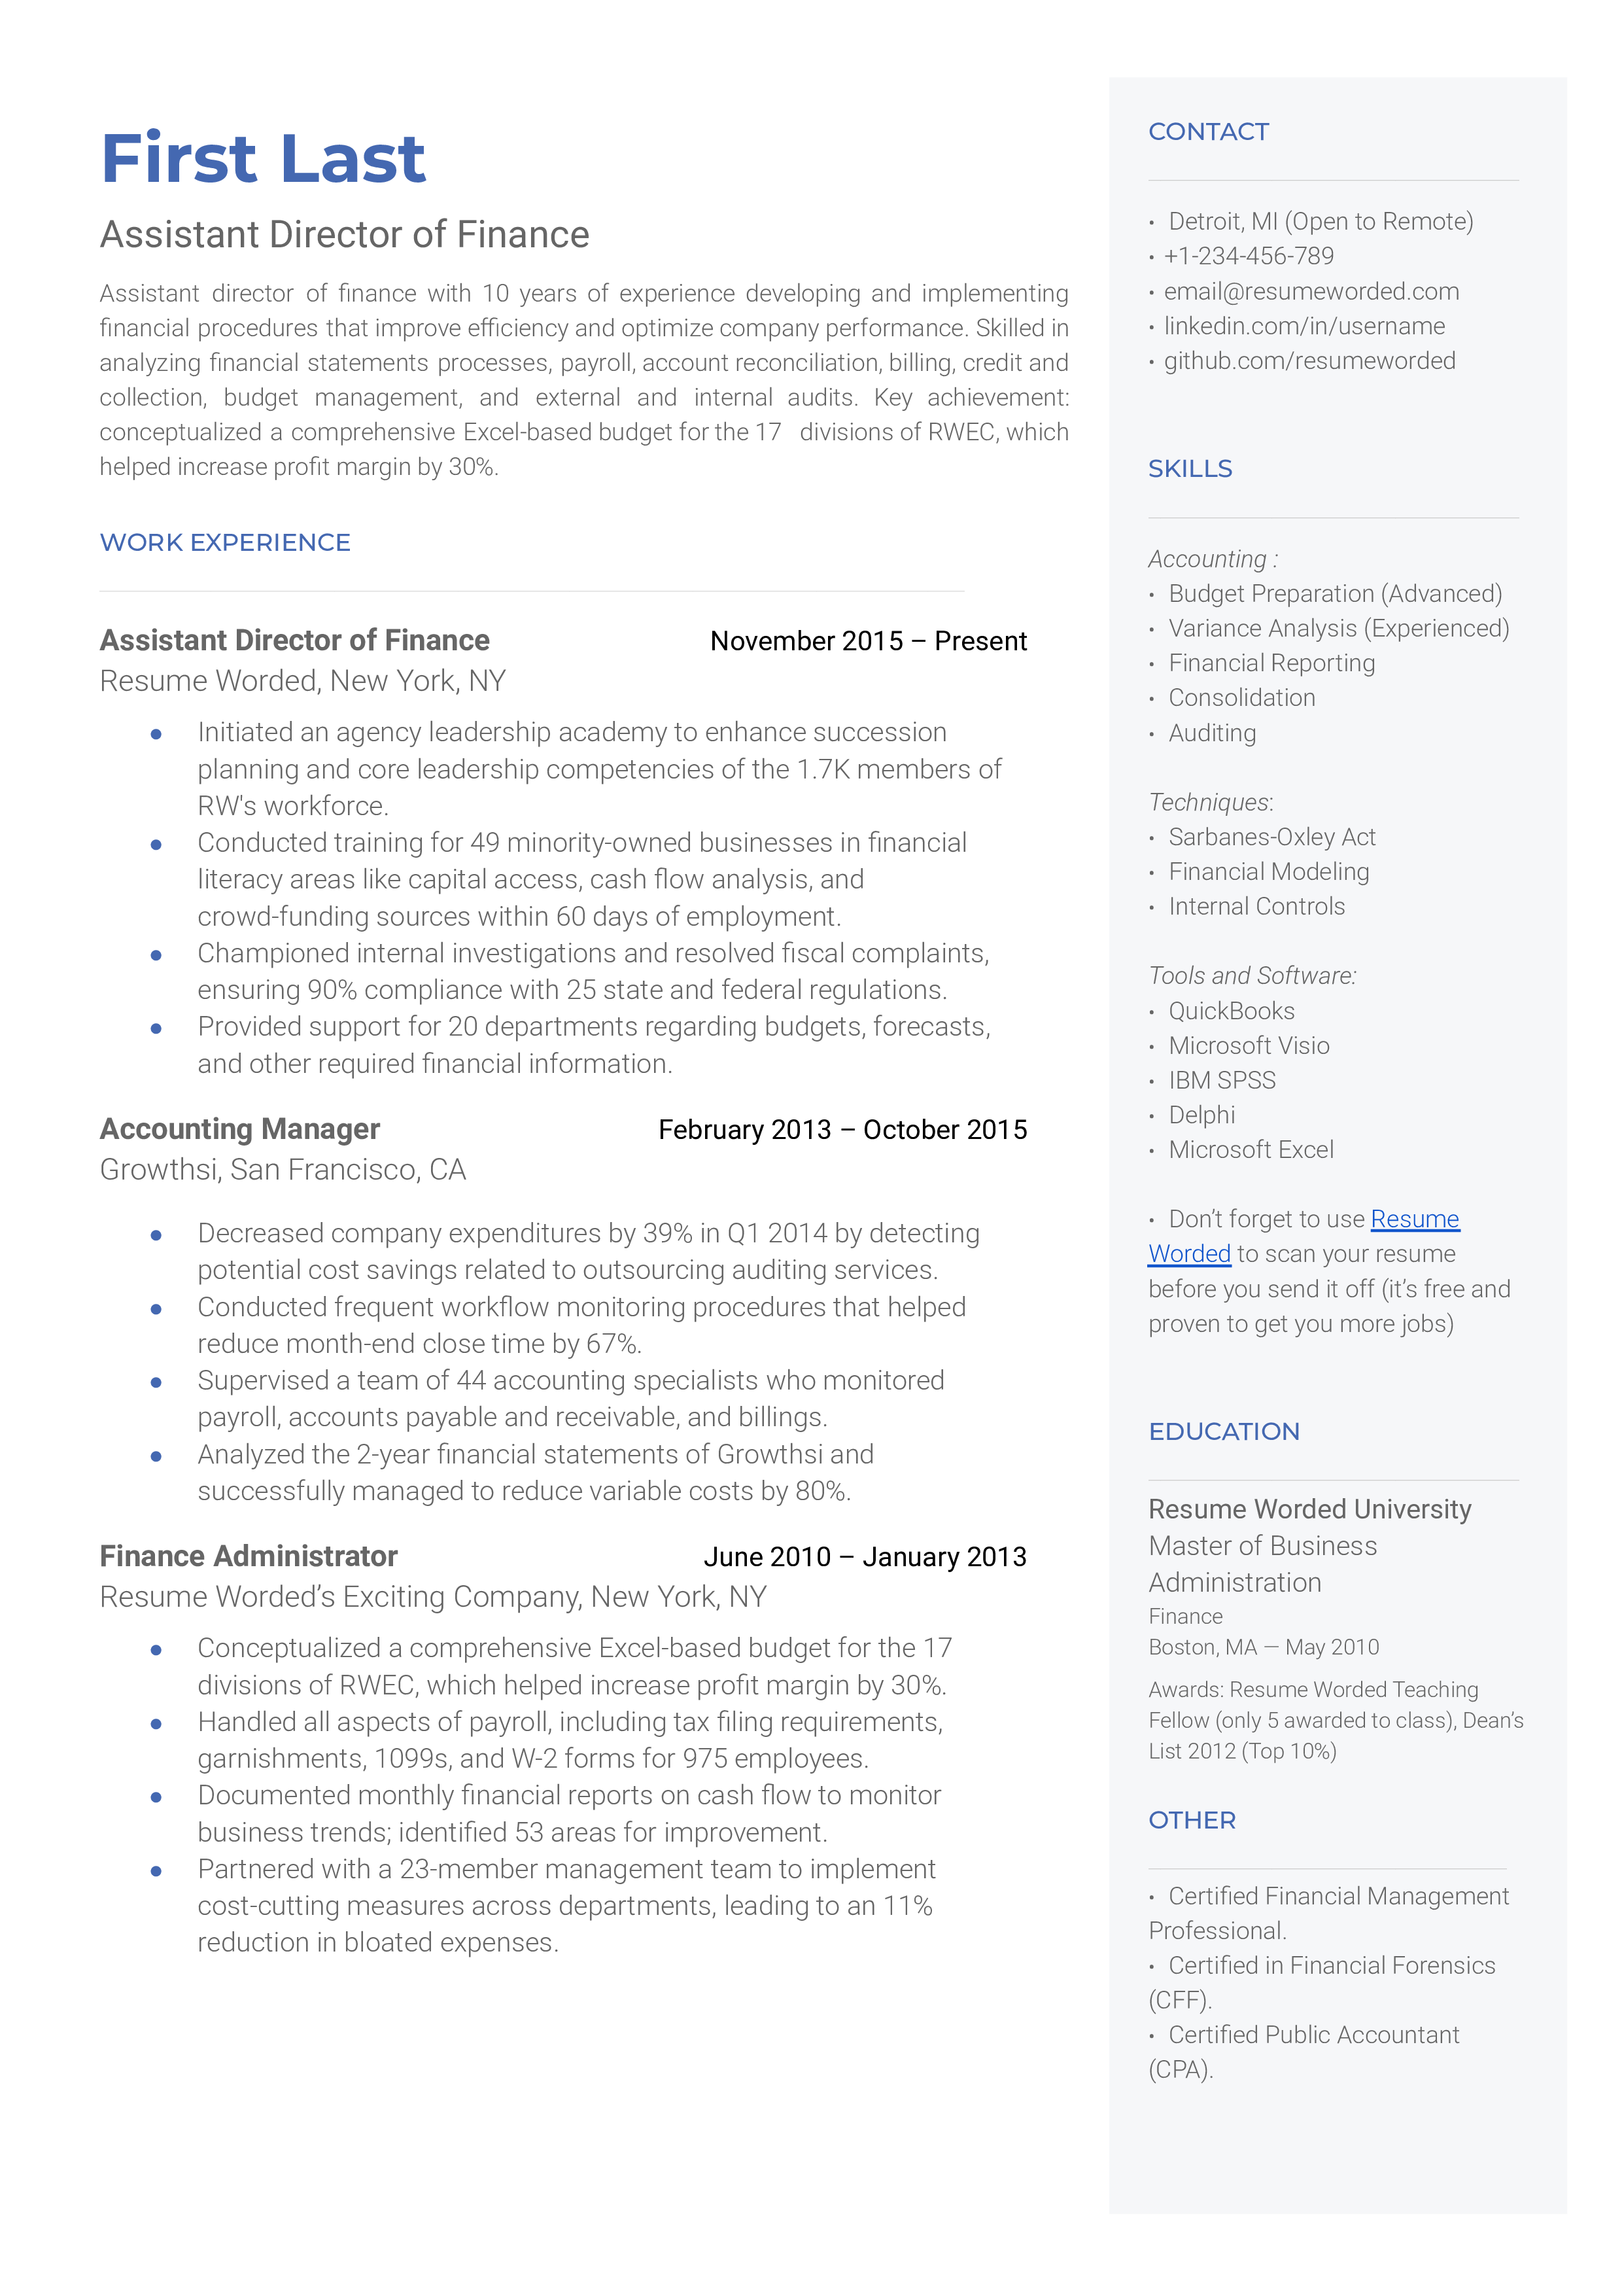 Screenshot of a CV for an Assistant Director of Finance role.